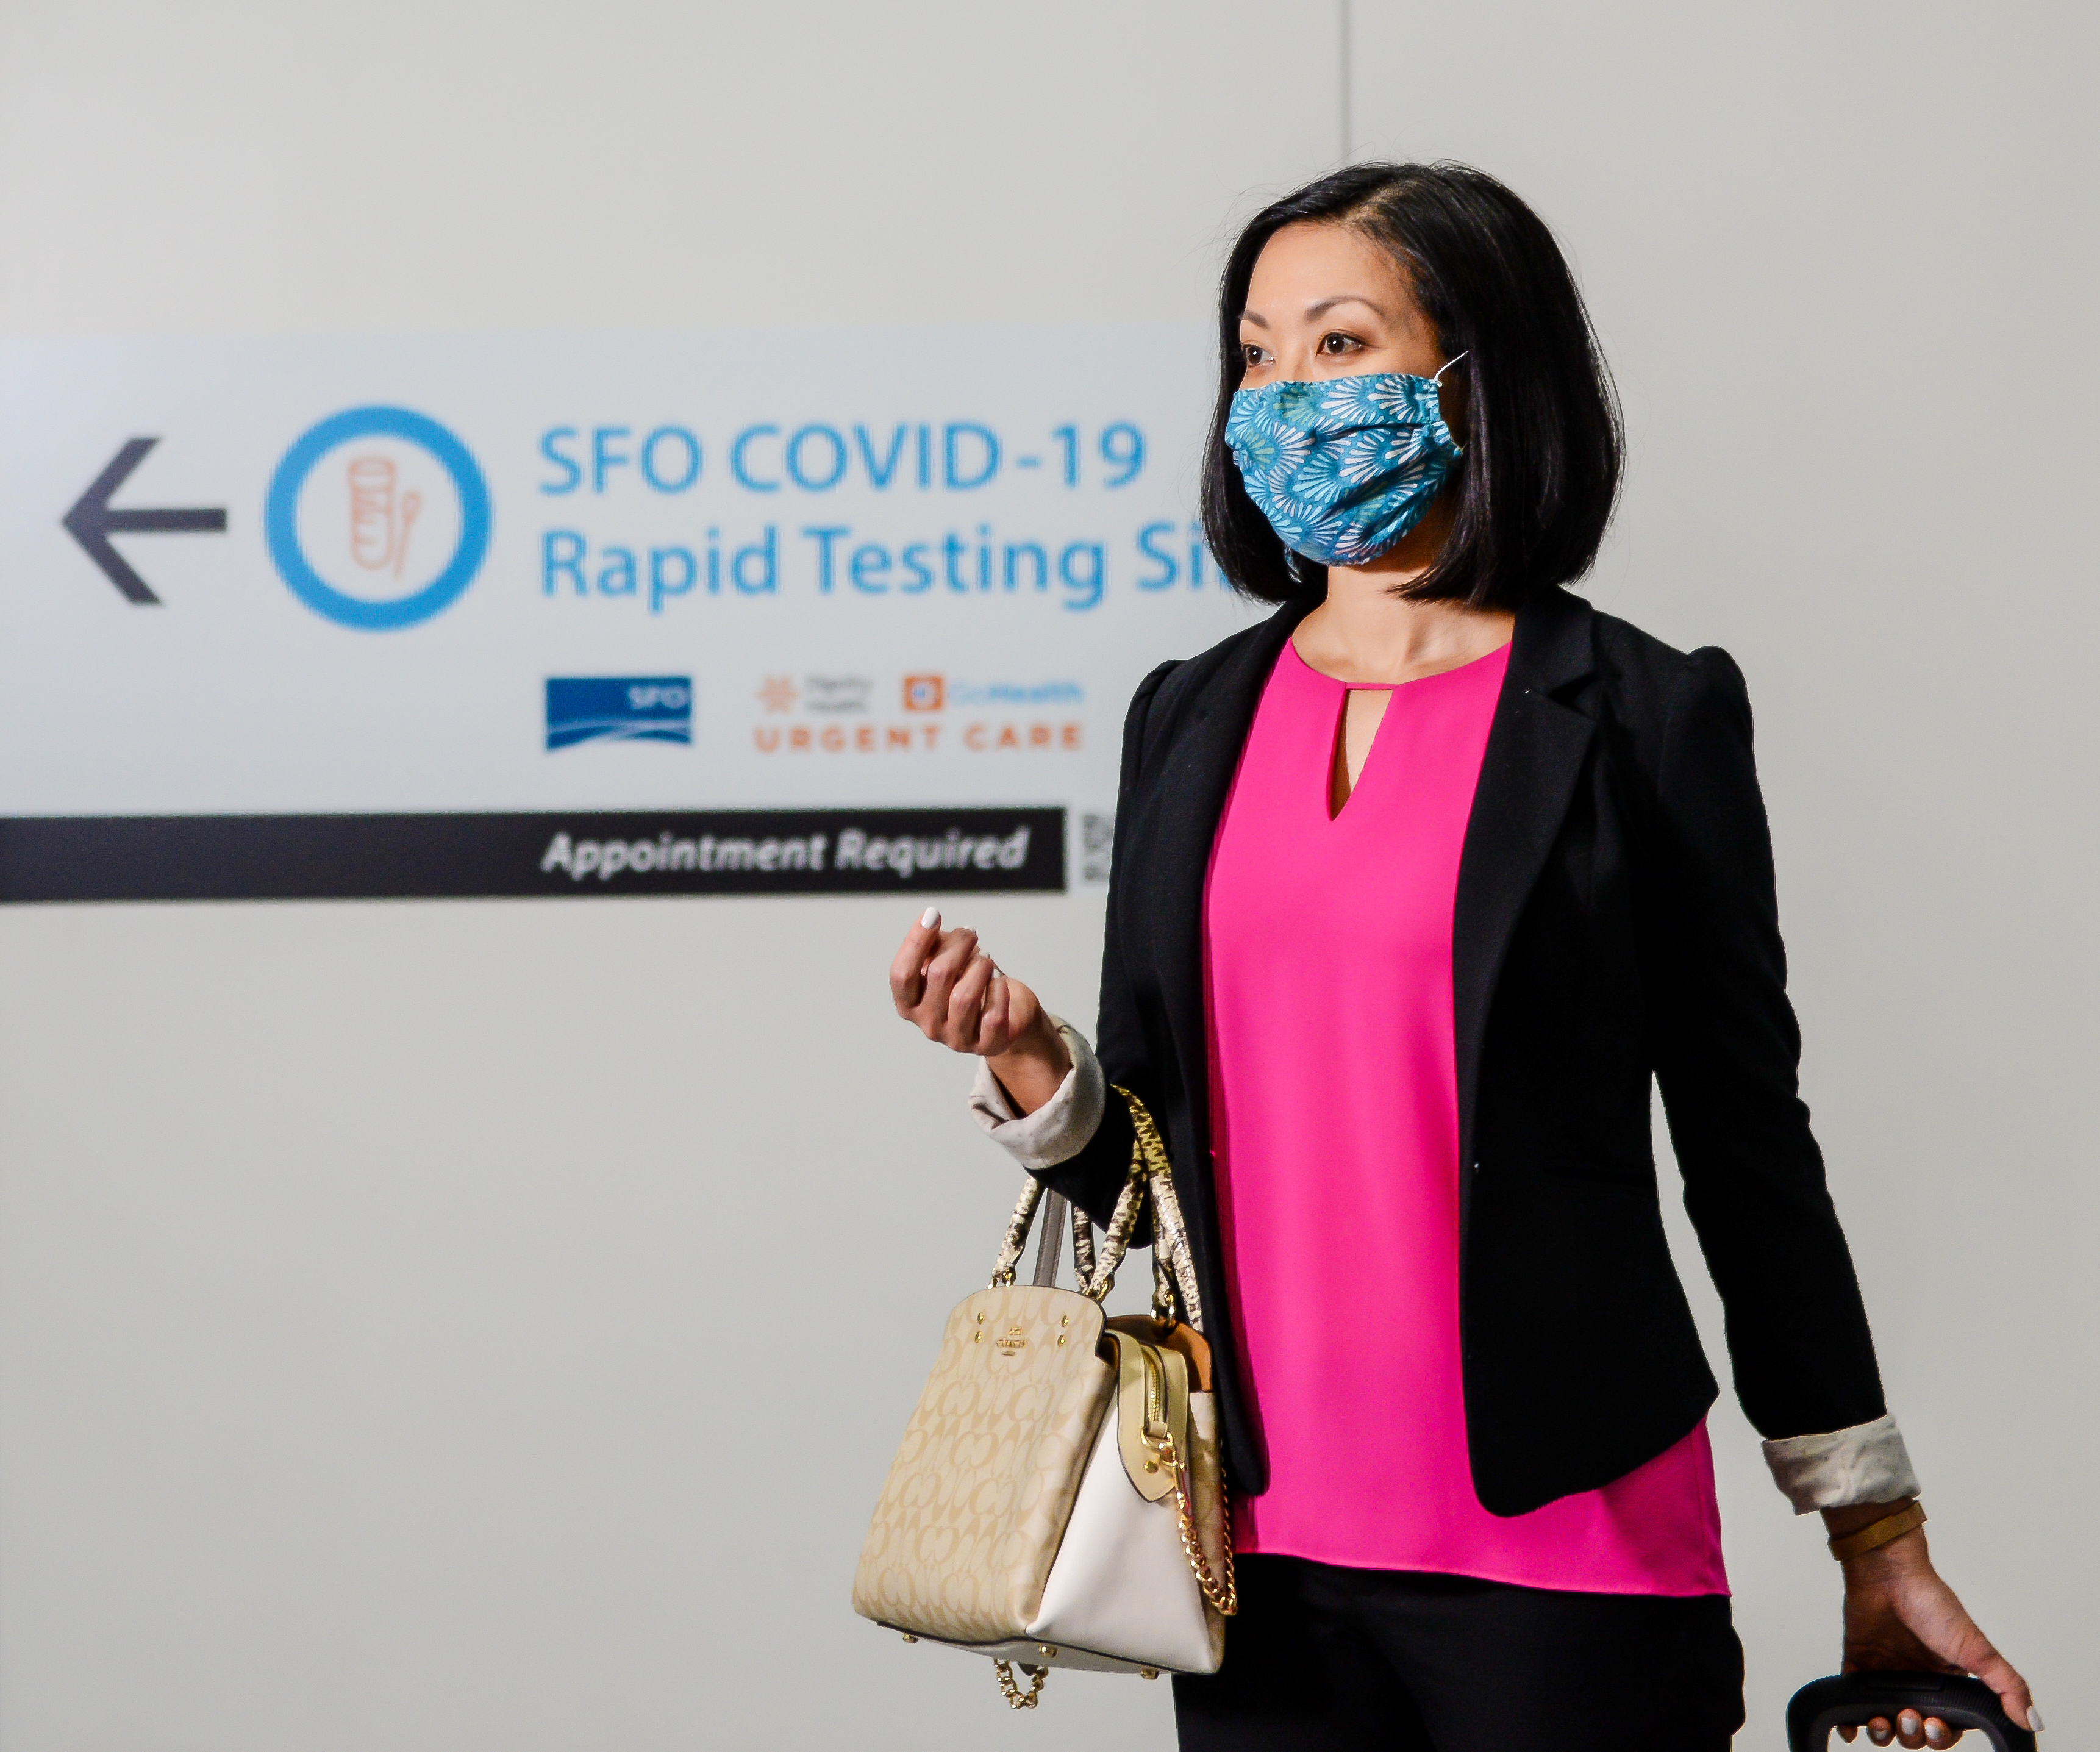 woman wearing a mask walks by a COVID-19 testing site at SFO airport